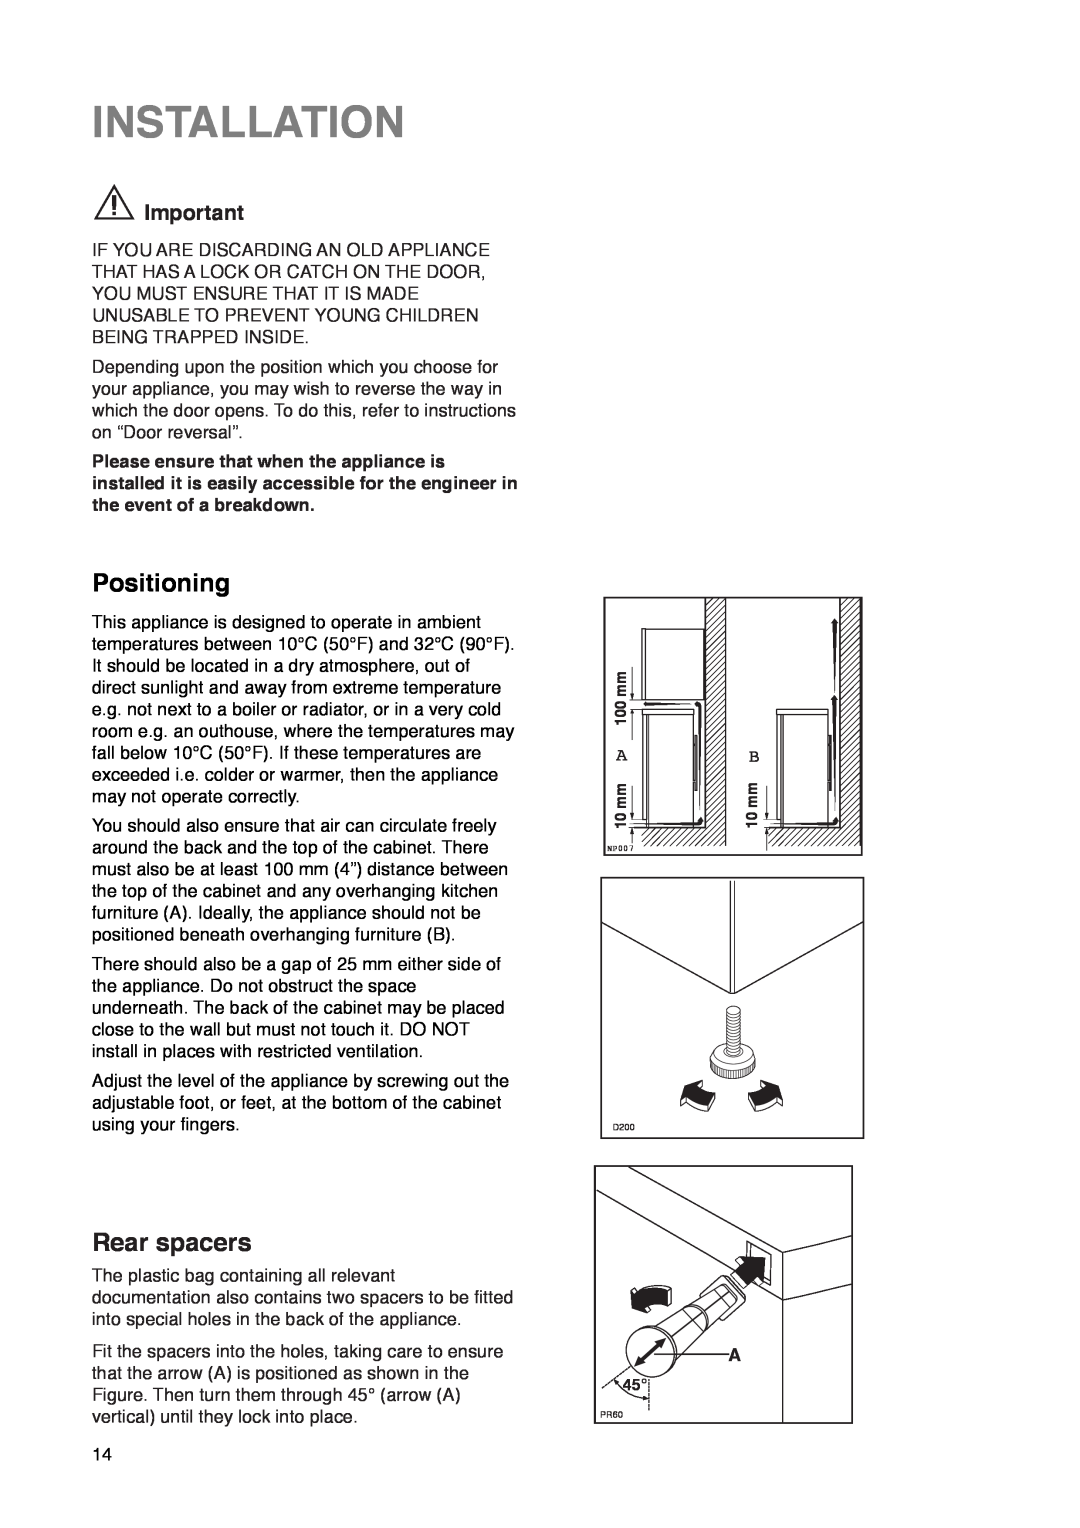 Zanussi ZC 85 L manual Installation, Positioning, Rear spacers 